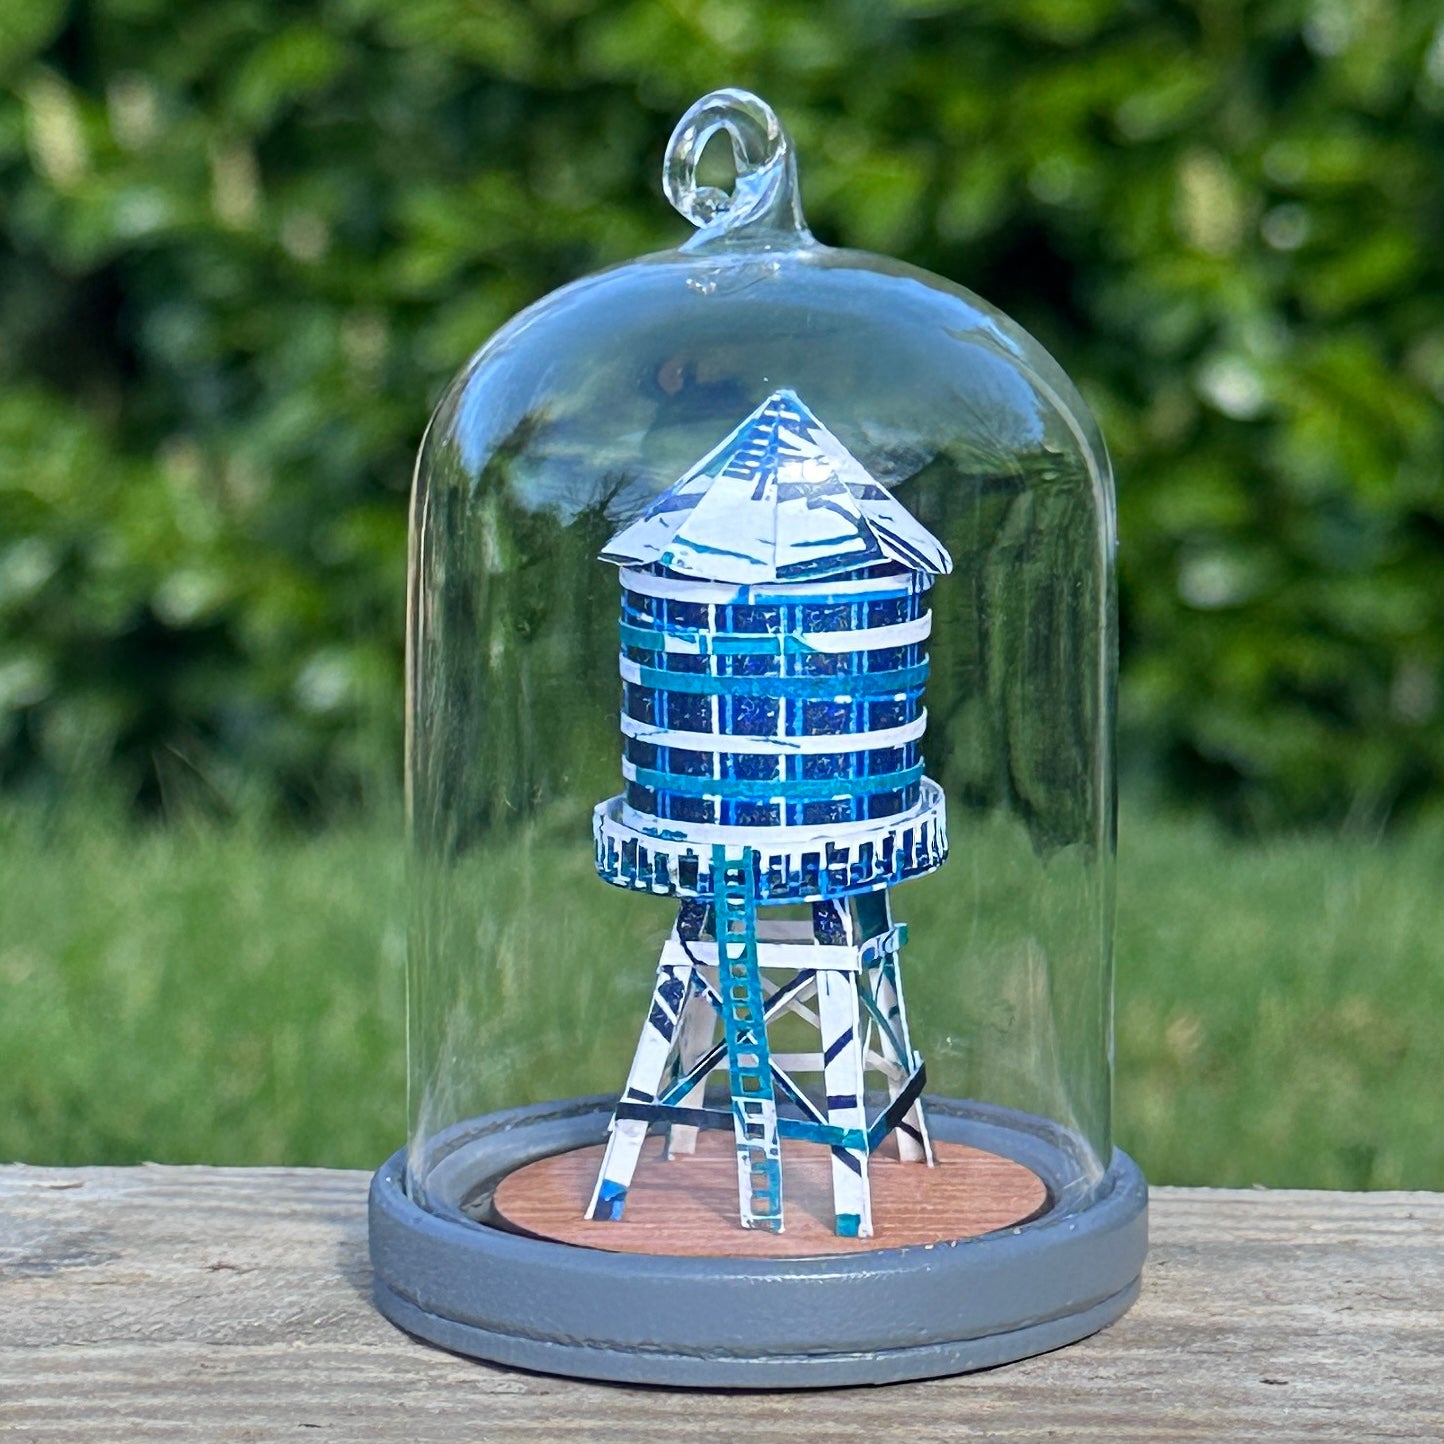 Handcut paper water tower over printed in shades of blue on grey base under glass dome